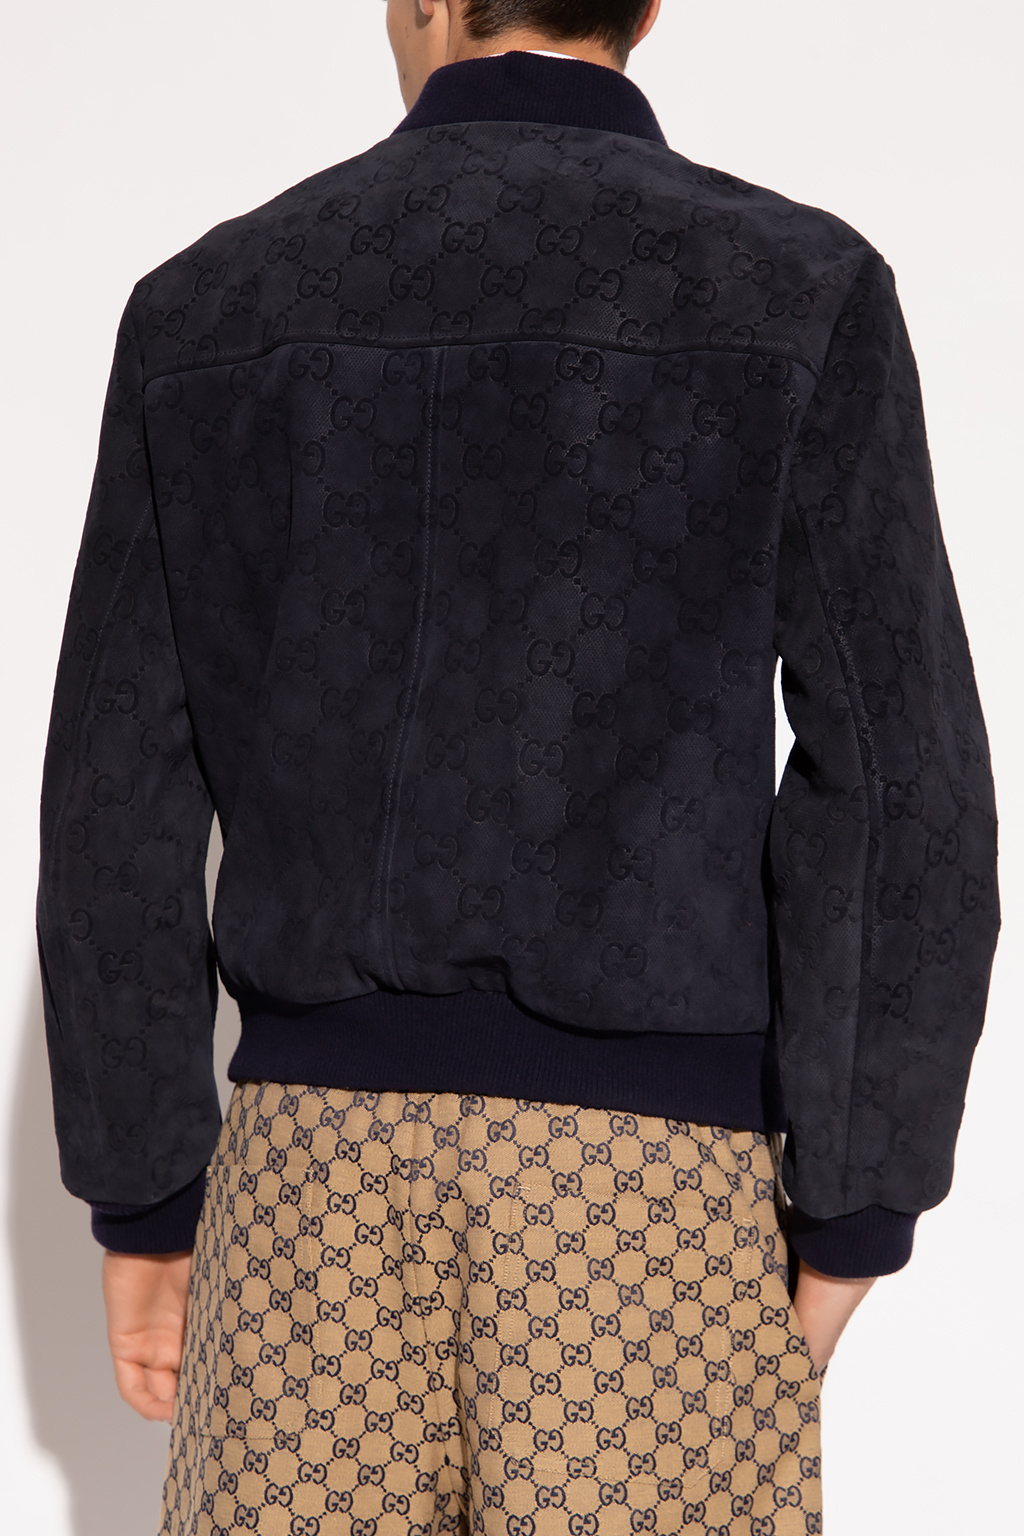 Bomber jacket Gucci - Gucci has been one of the pioneers in this 